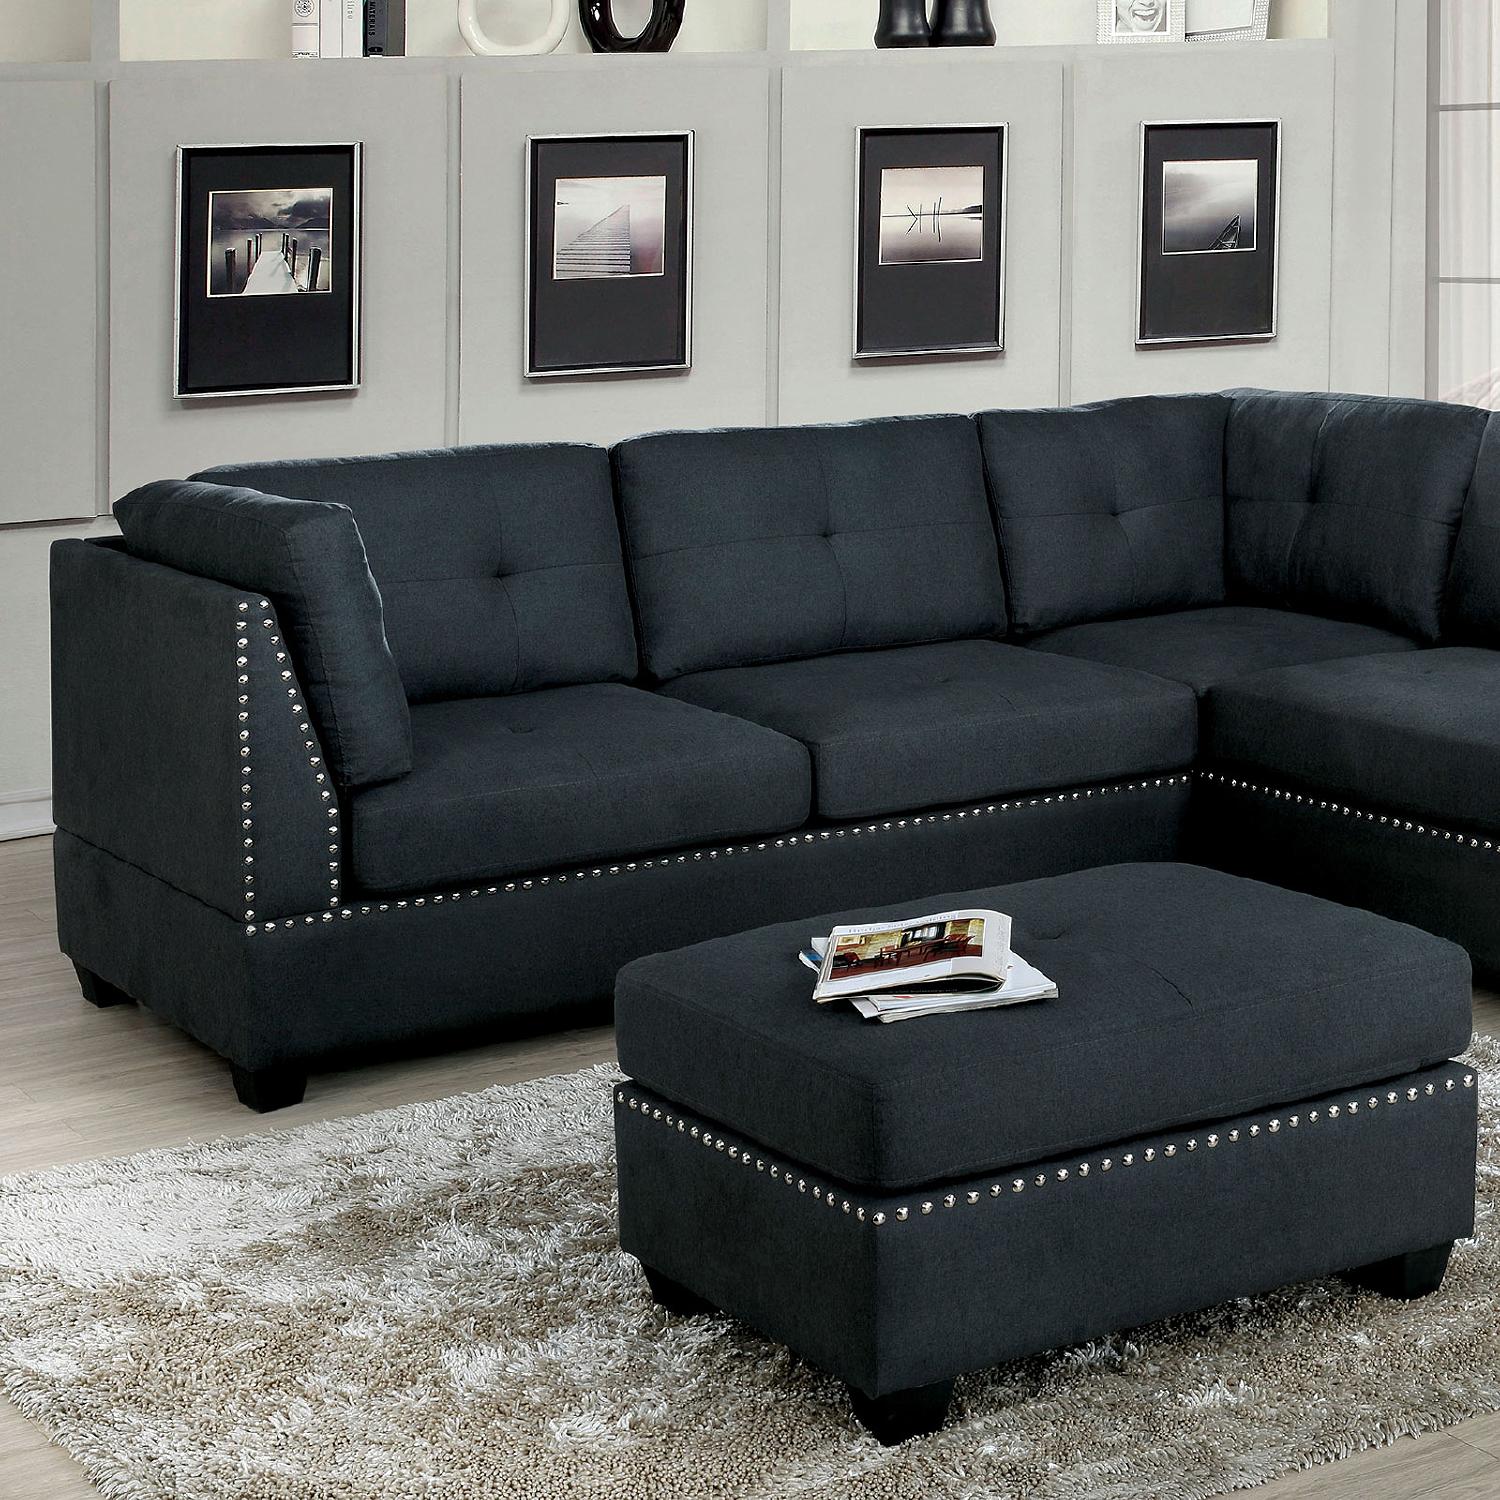 Transitional Sectional Sofa CM6966-SECT Lita CM6966-SECT in Dark Gray 